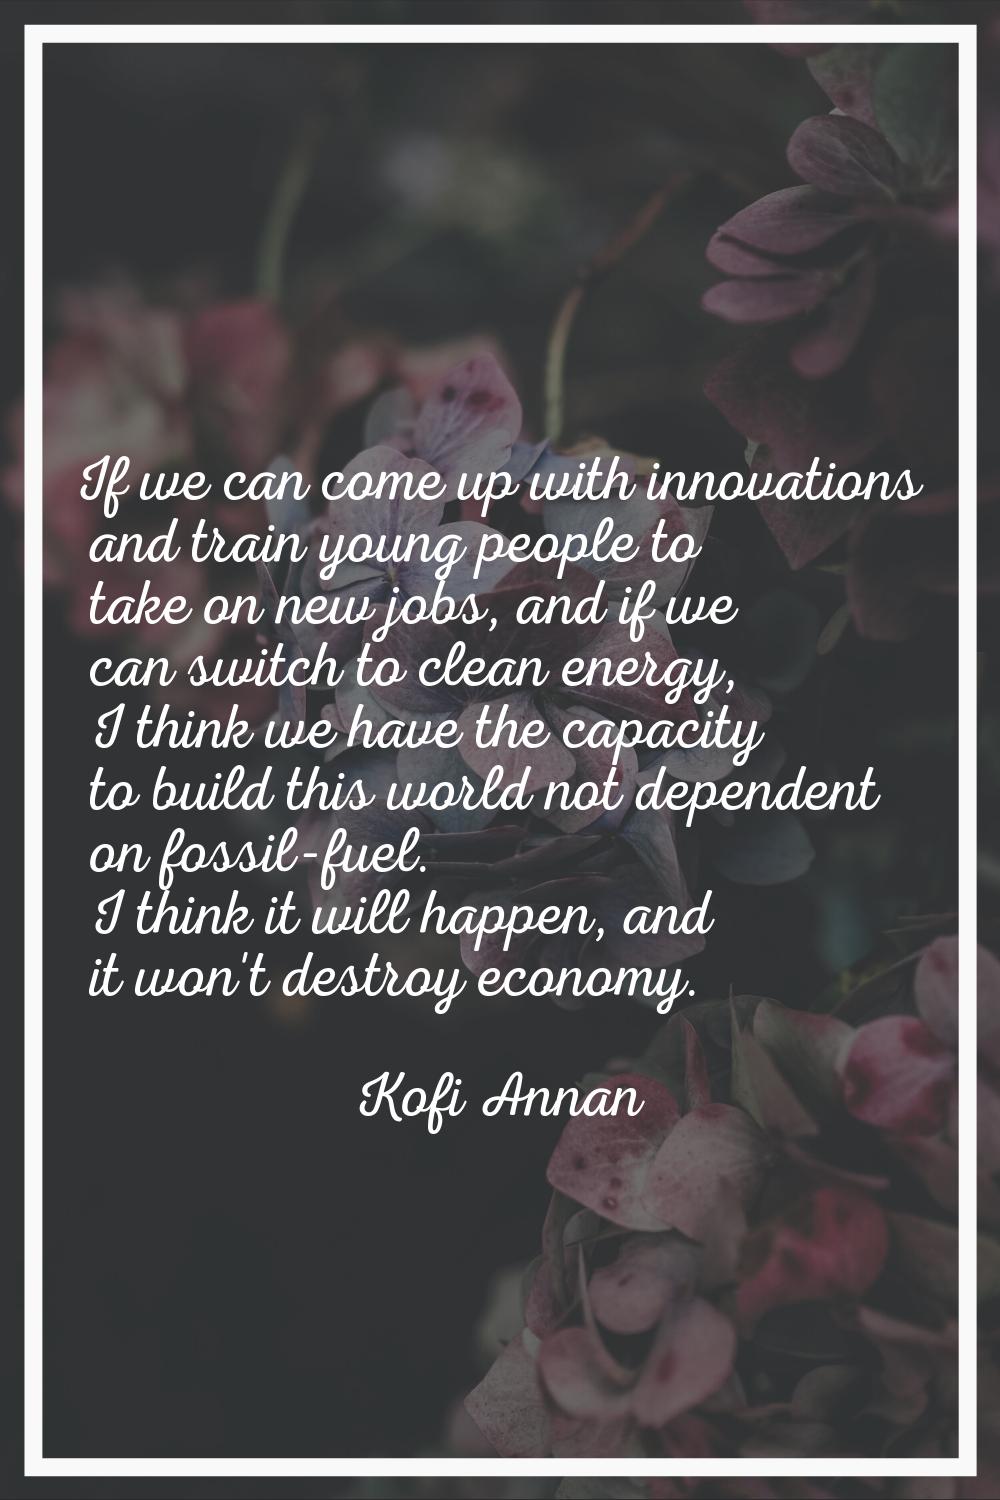 If we can come up with innovations and train young people to take on new jobs, and if we can switch